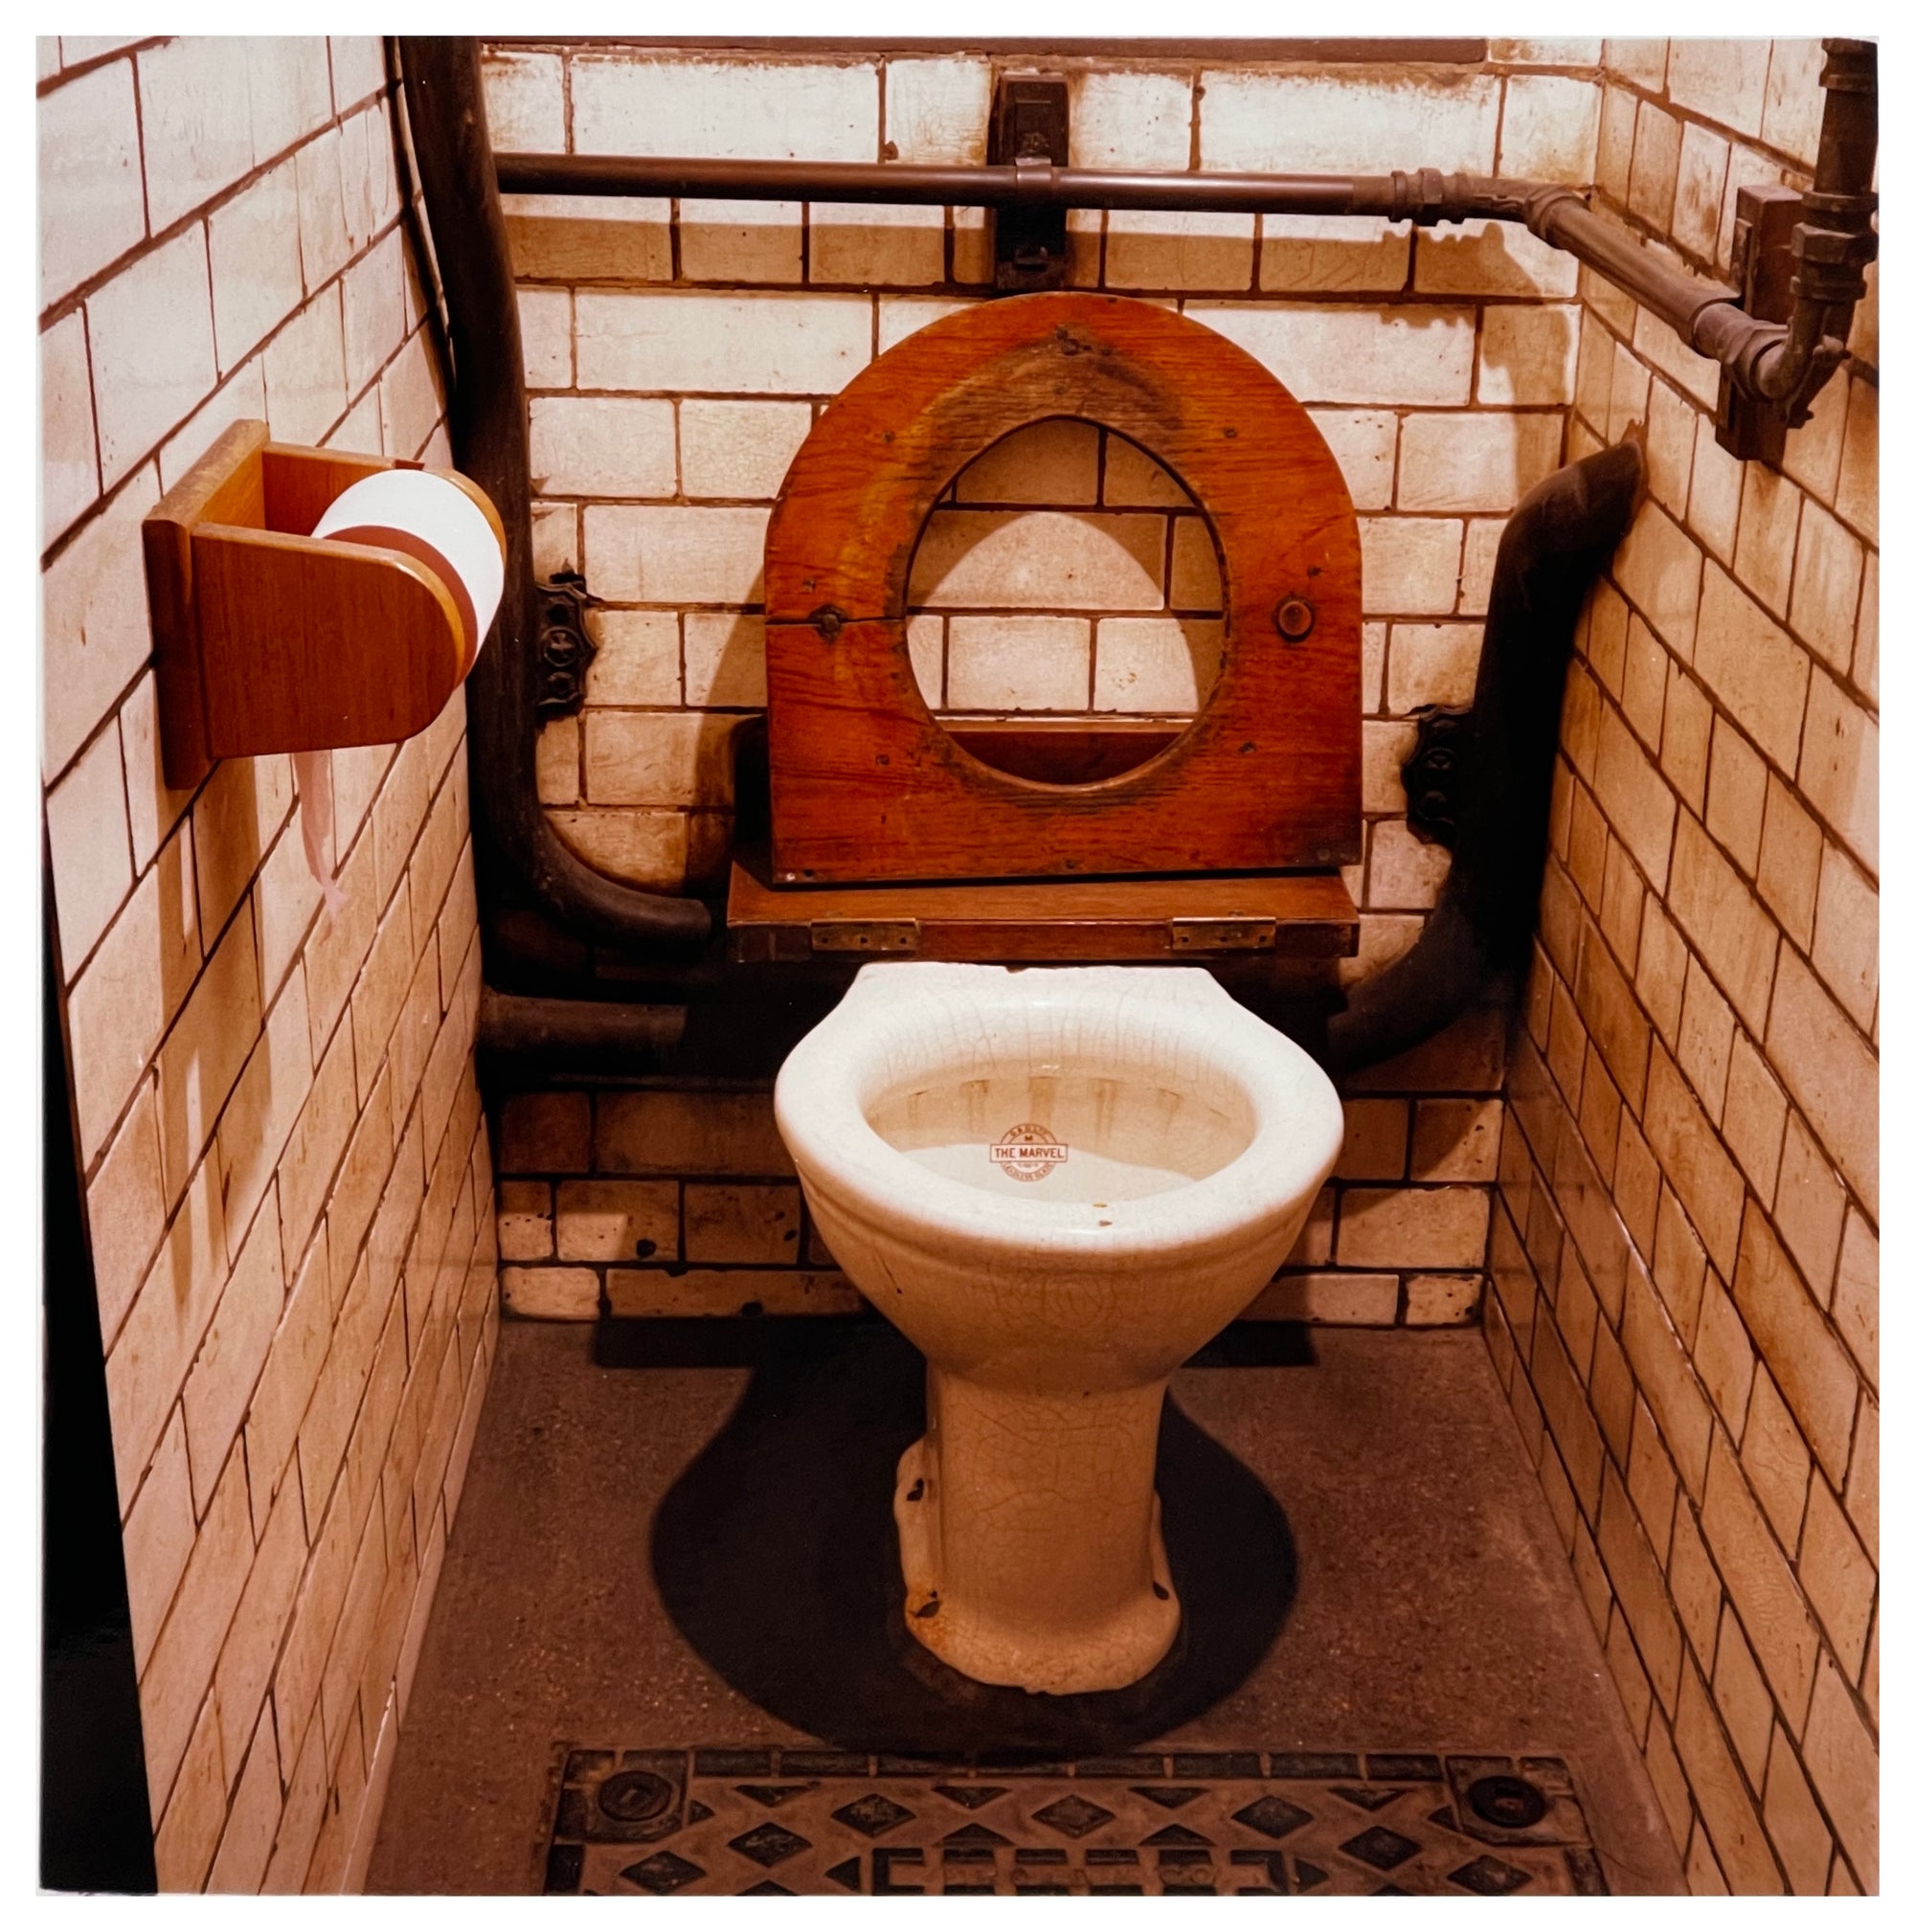 Photograph by Richard Heeps.  A well used toilet with a old wooden seat in the up position.  Dirty white tiles and old black piping surround the toilet.